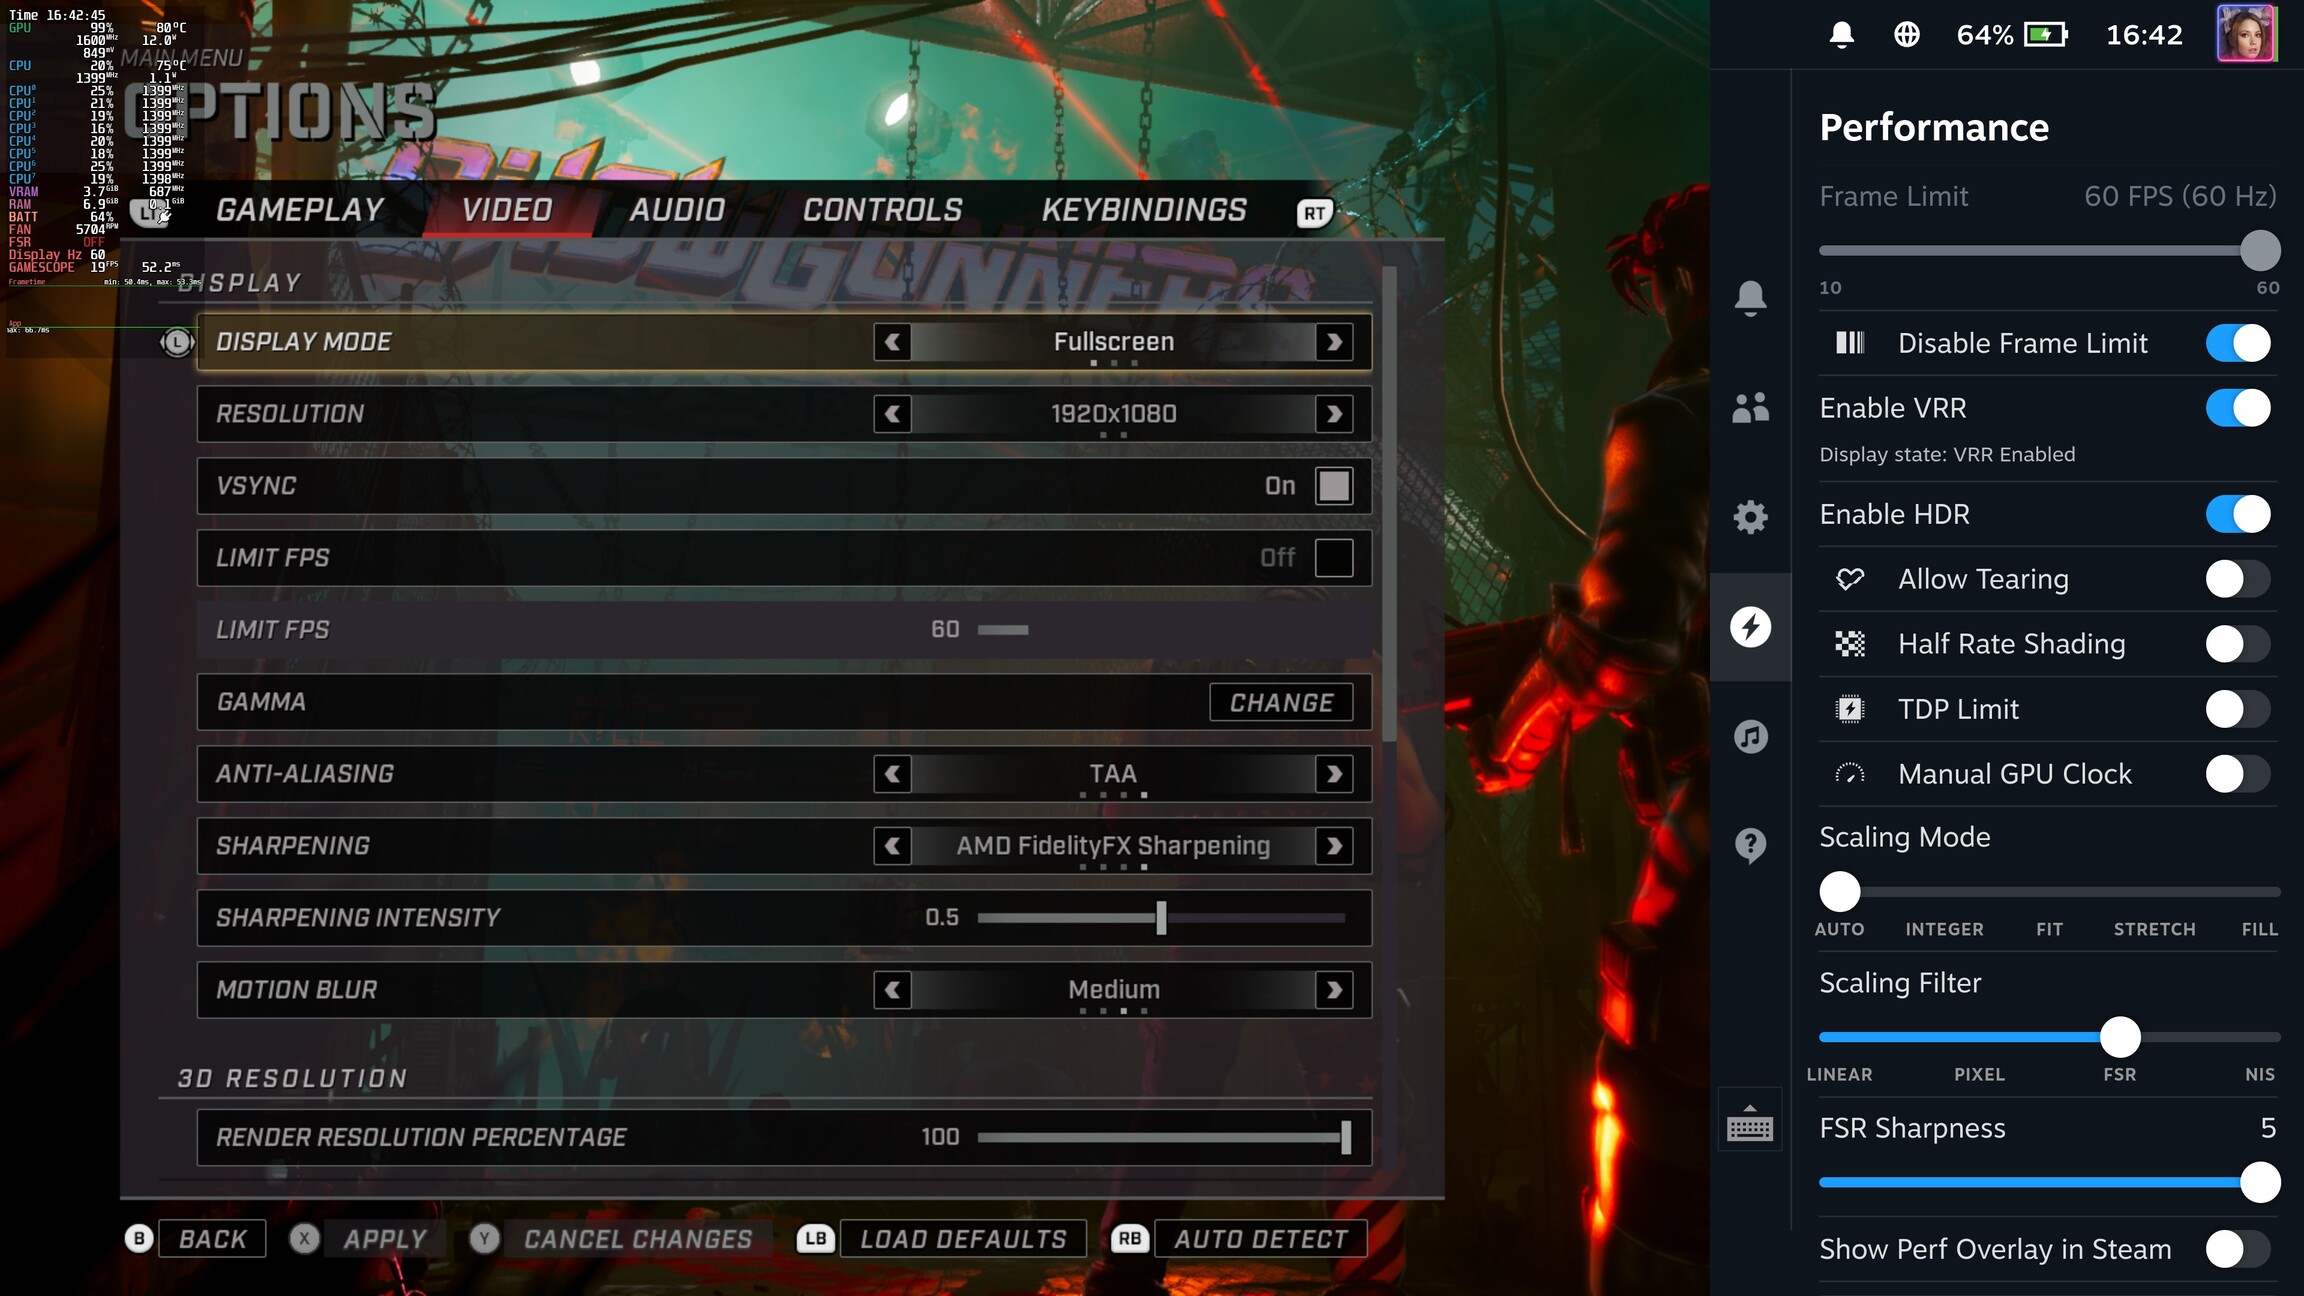 Showgunners on Steam Deck with TV, cannot enable FSR